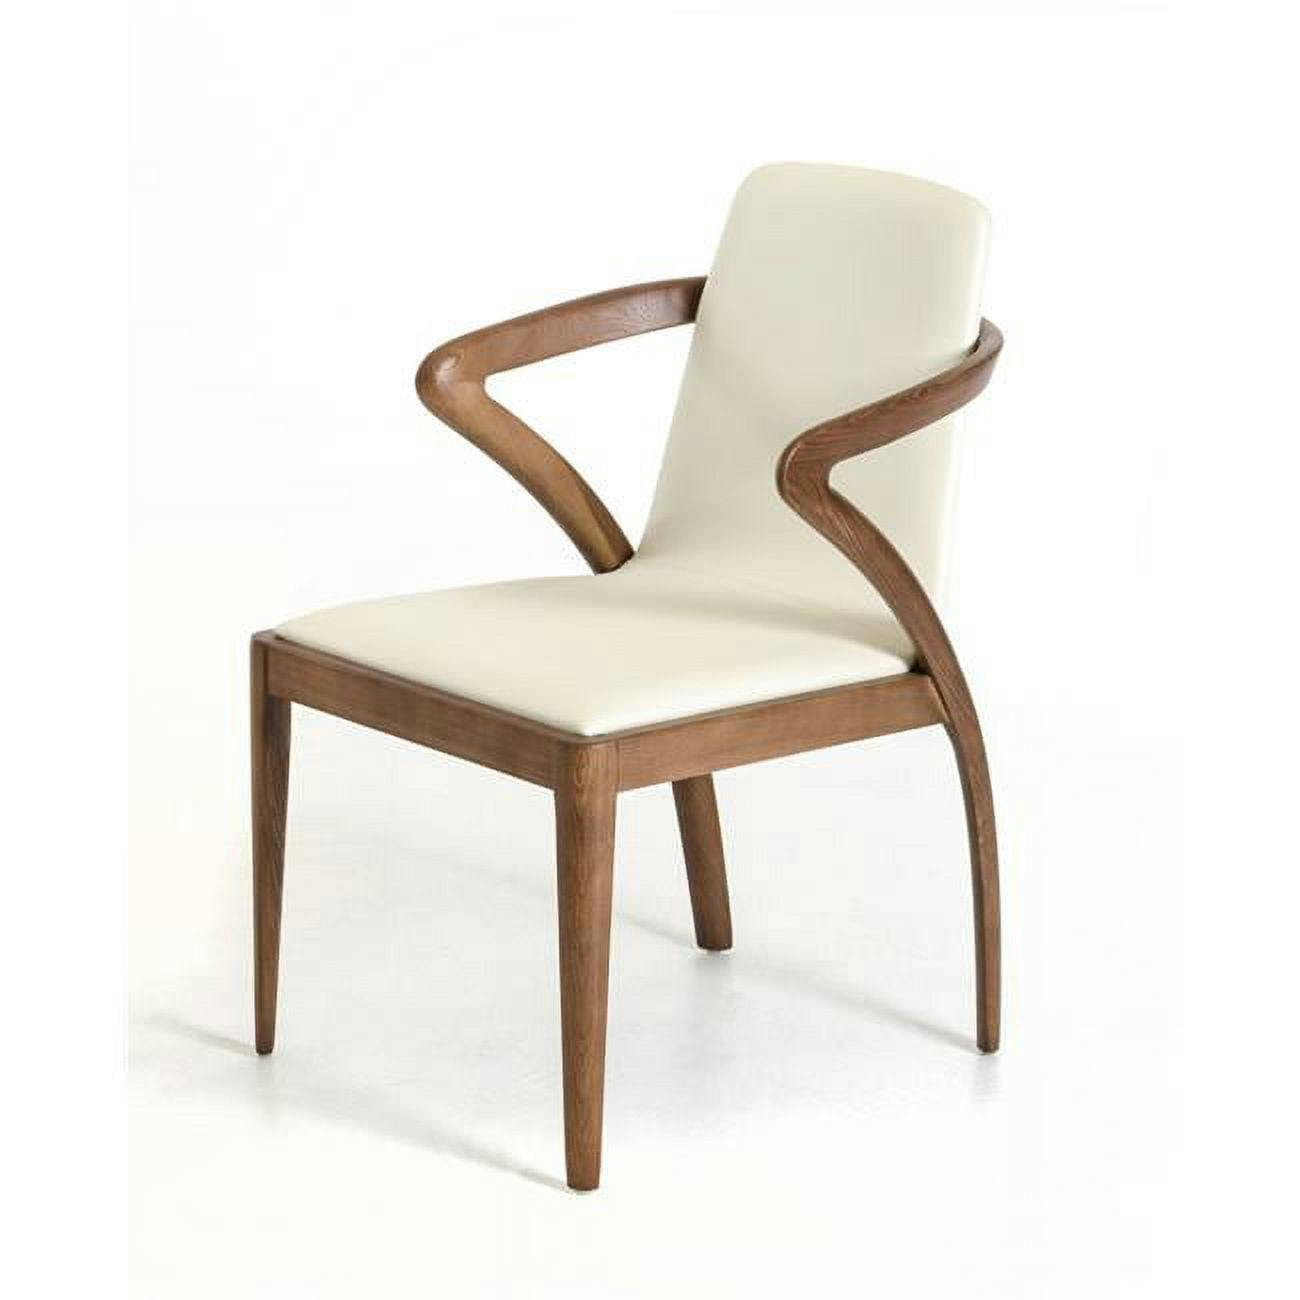 Walnut & Cream Faux Leather Parsons Dining Chair